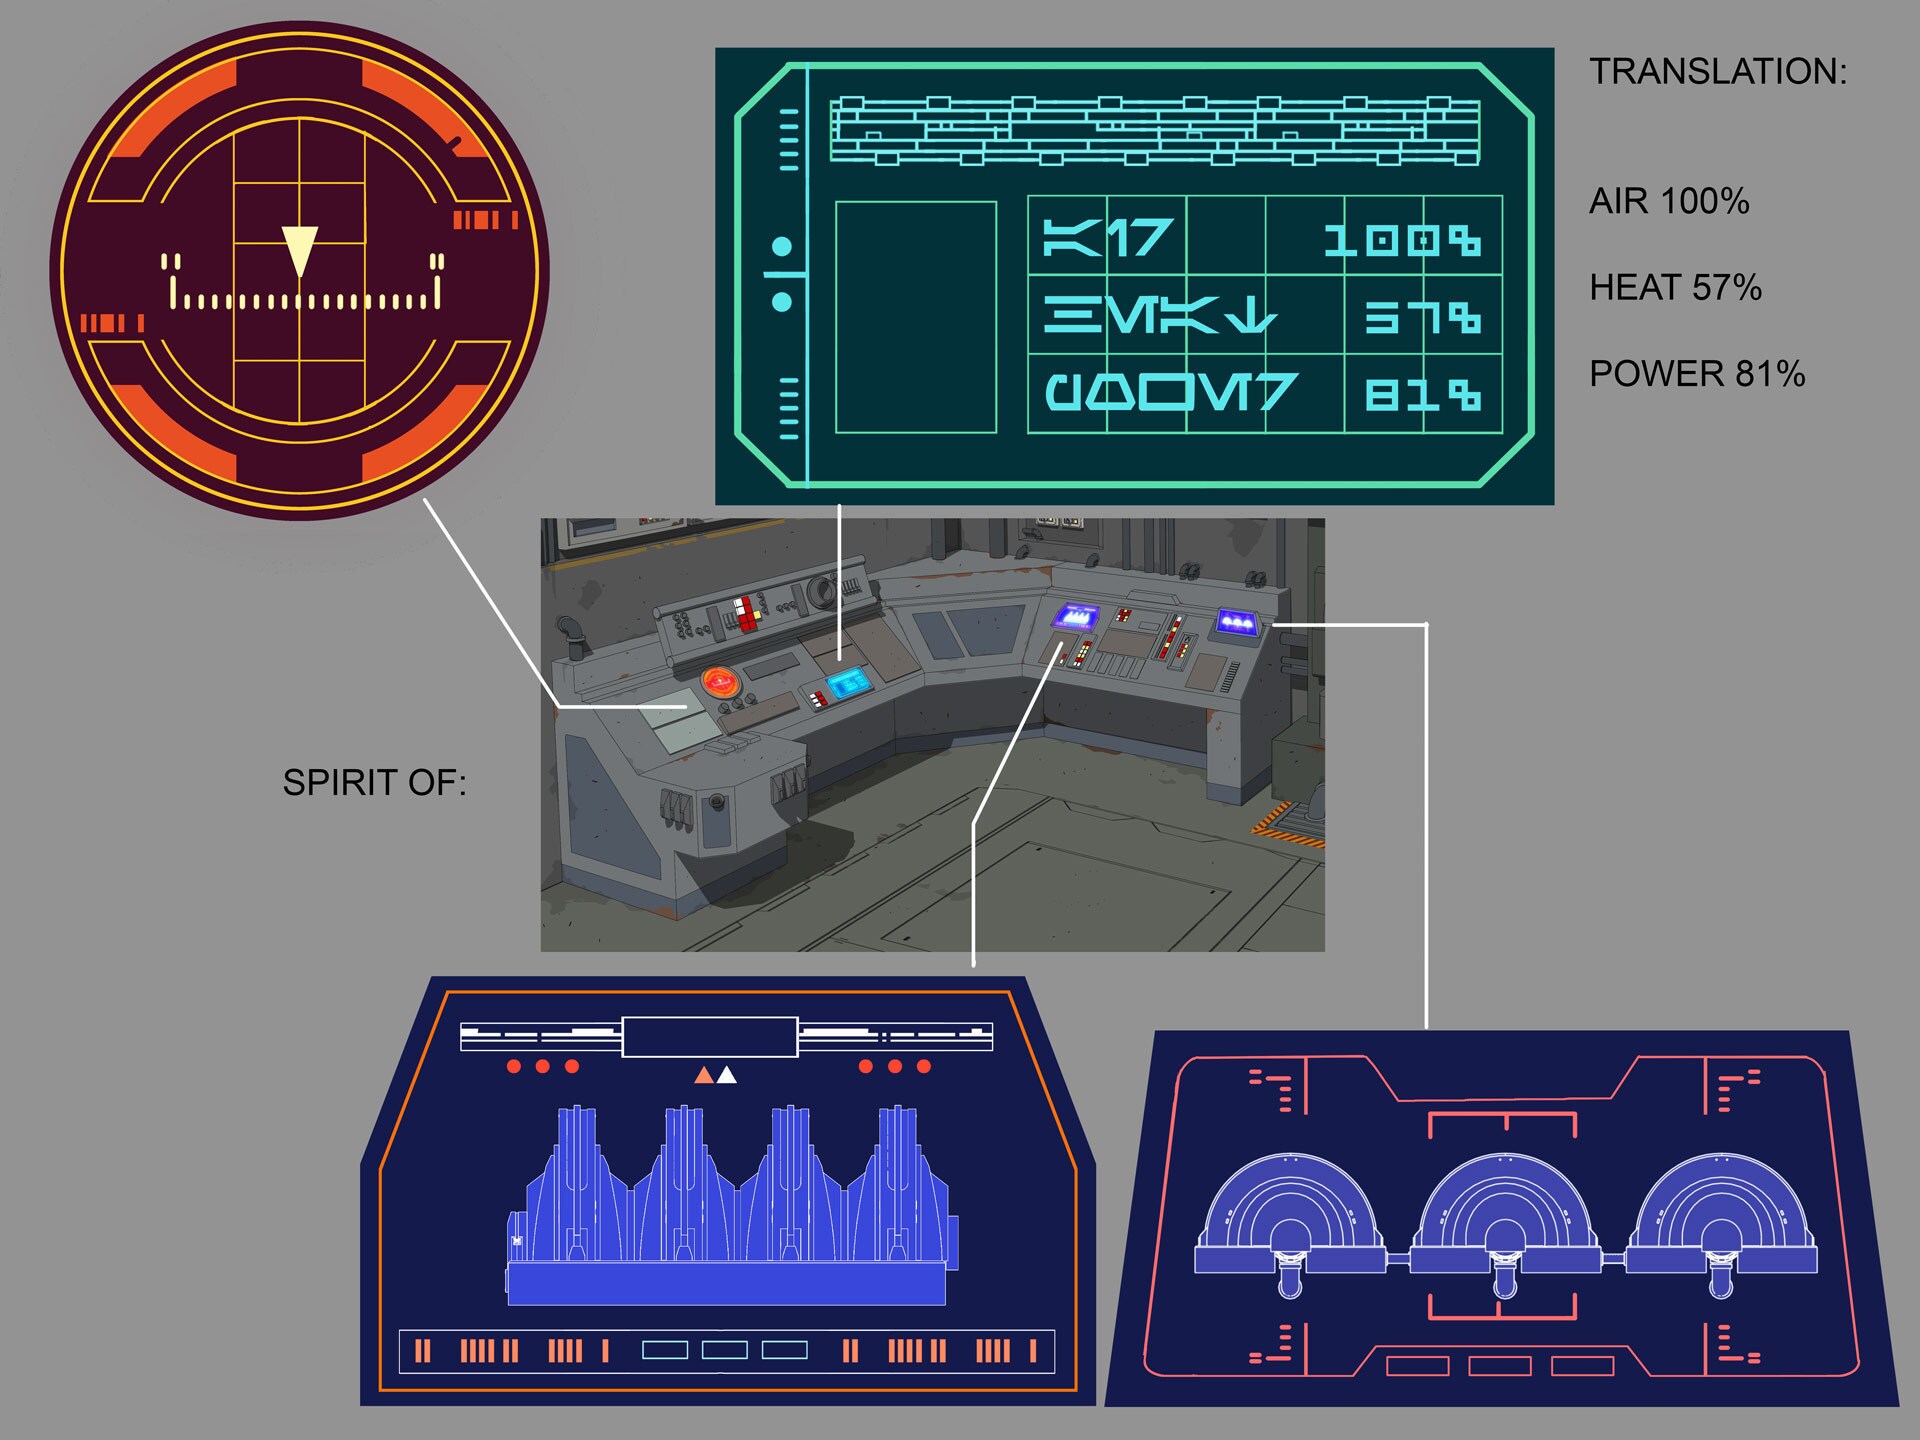 Base engine level screen details by Colas Gauthier.